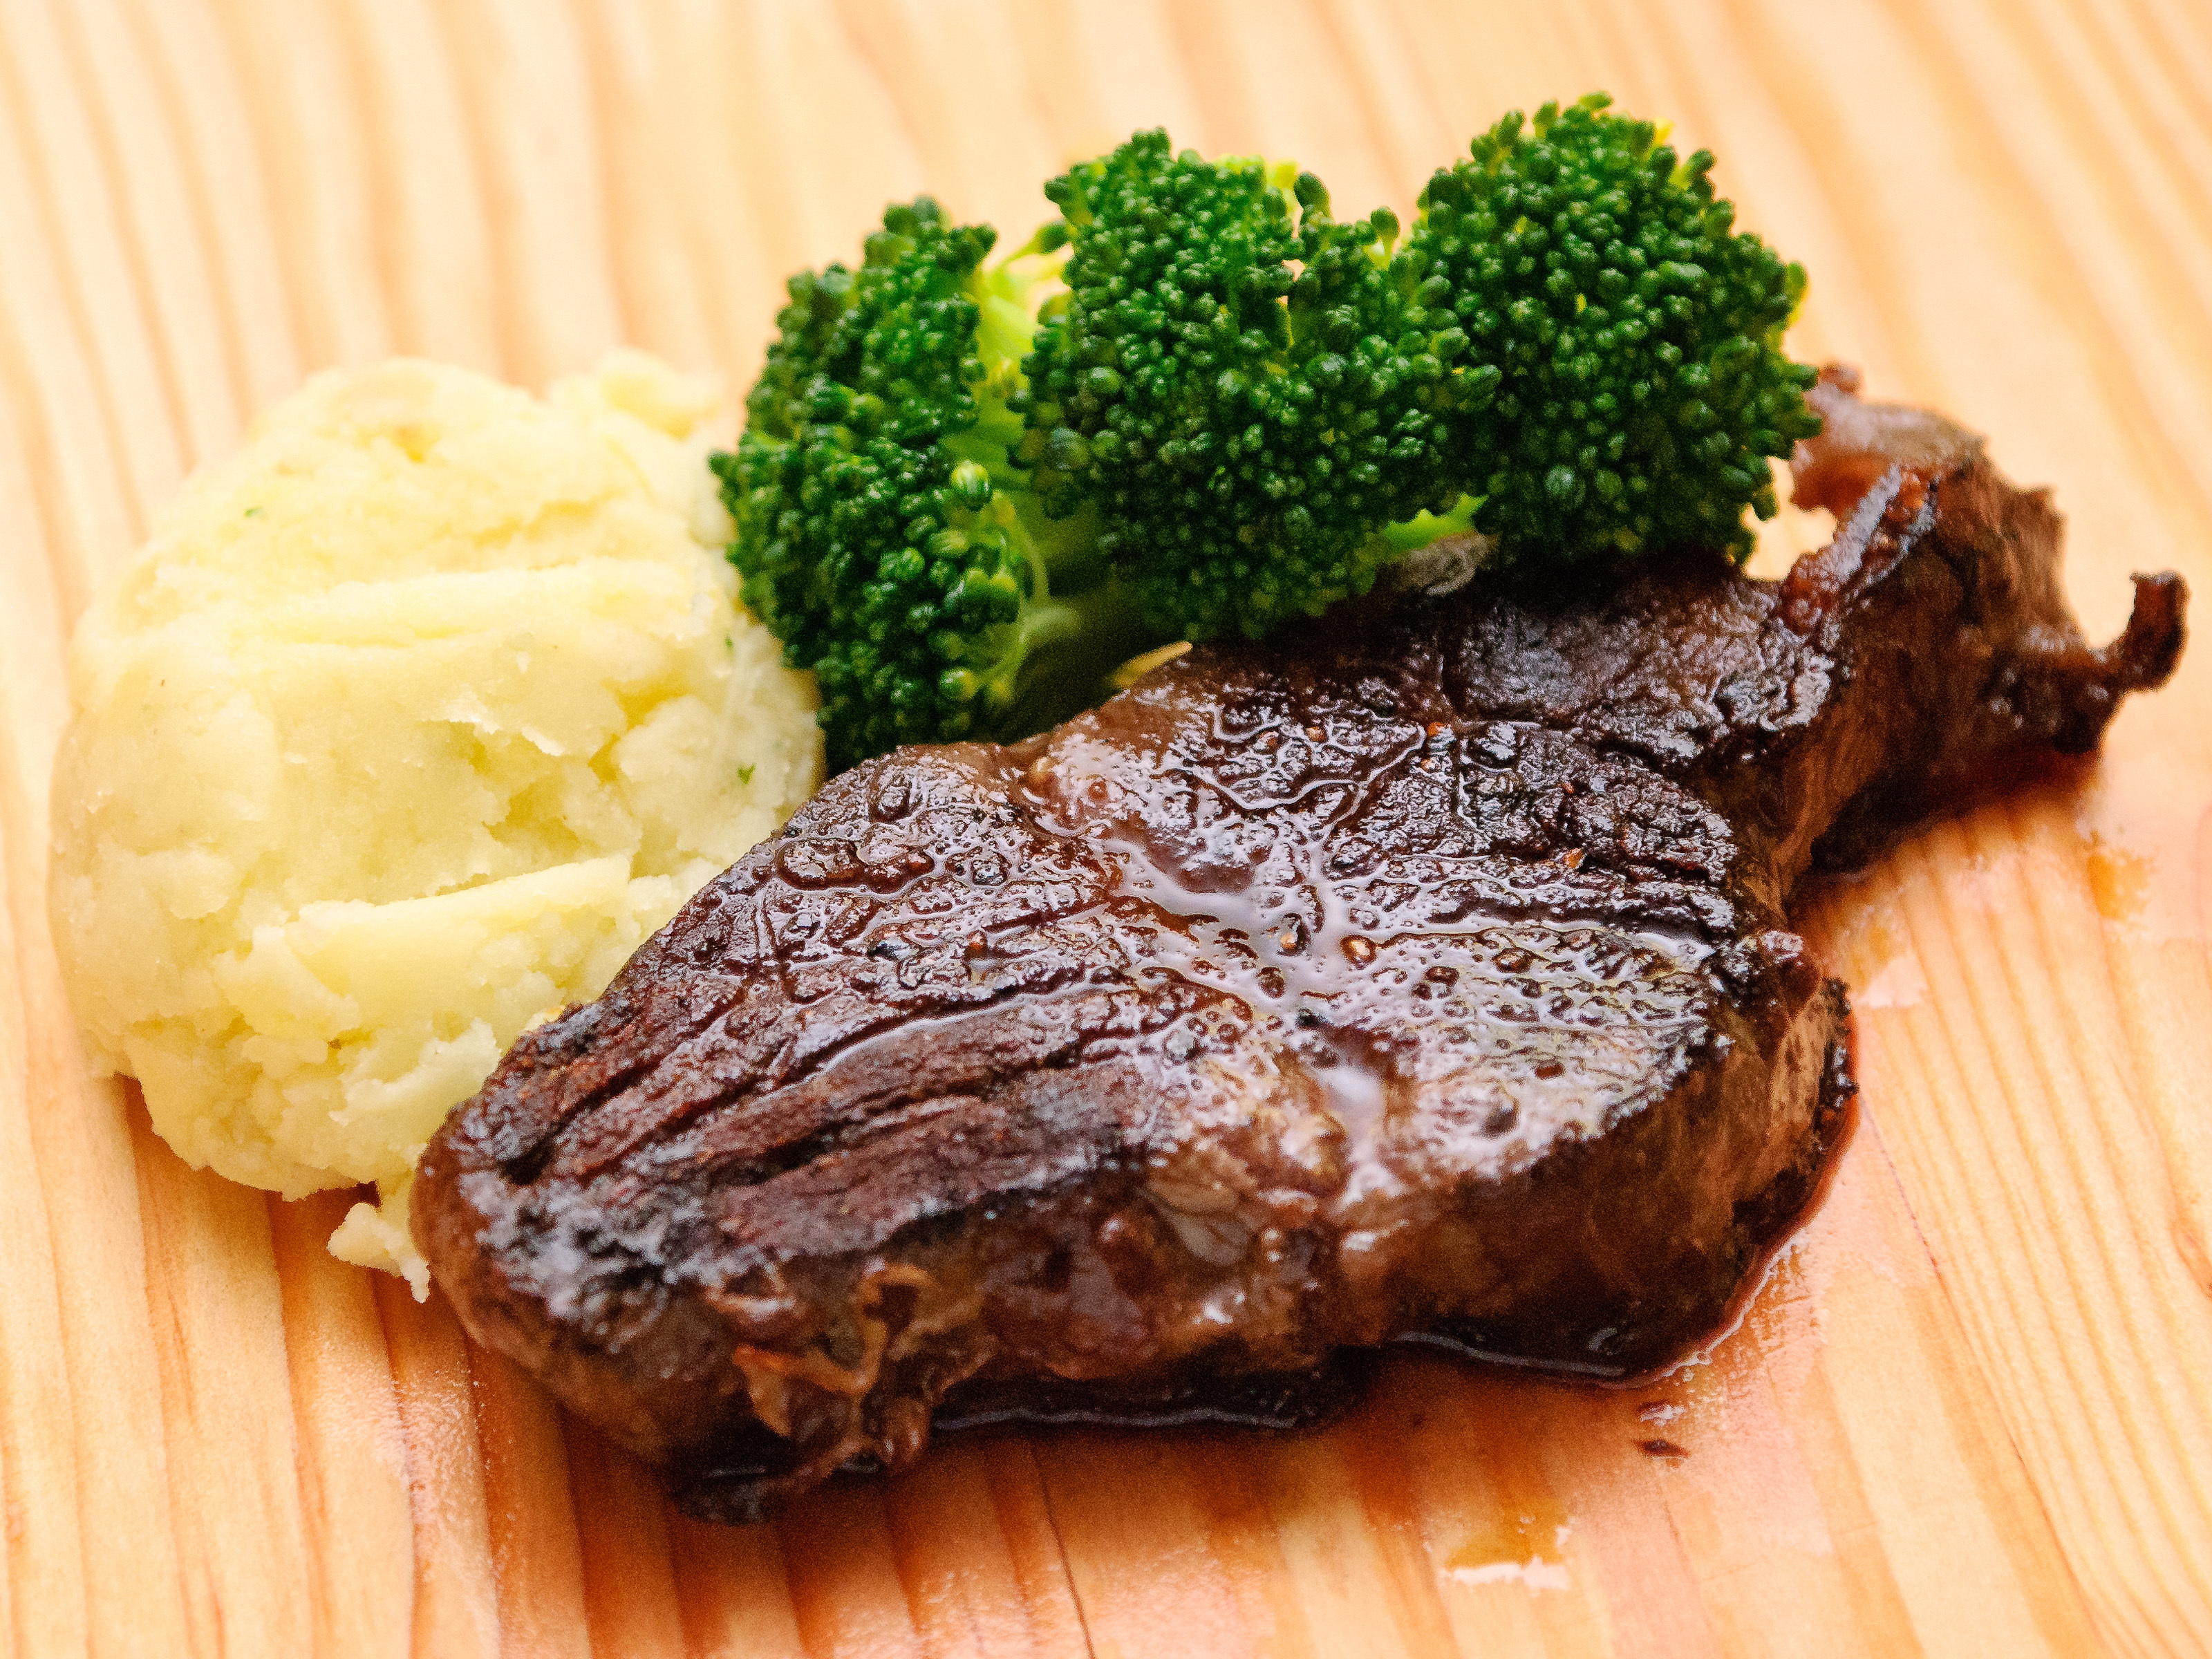 Beef Steak Wallpaper Image Photos Pictures Background